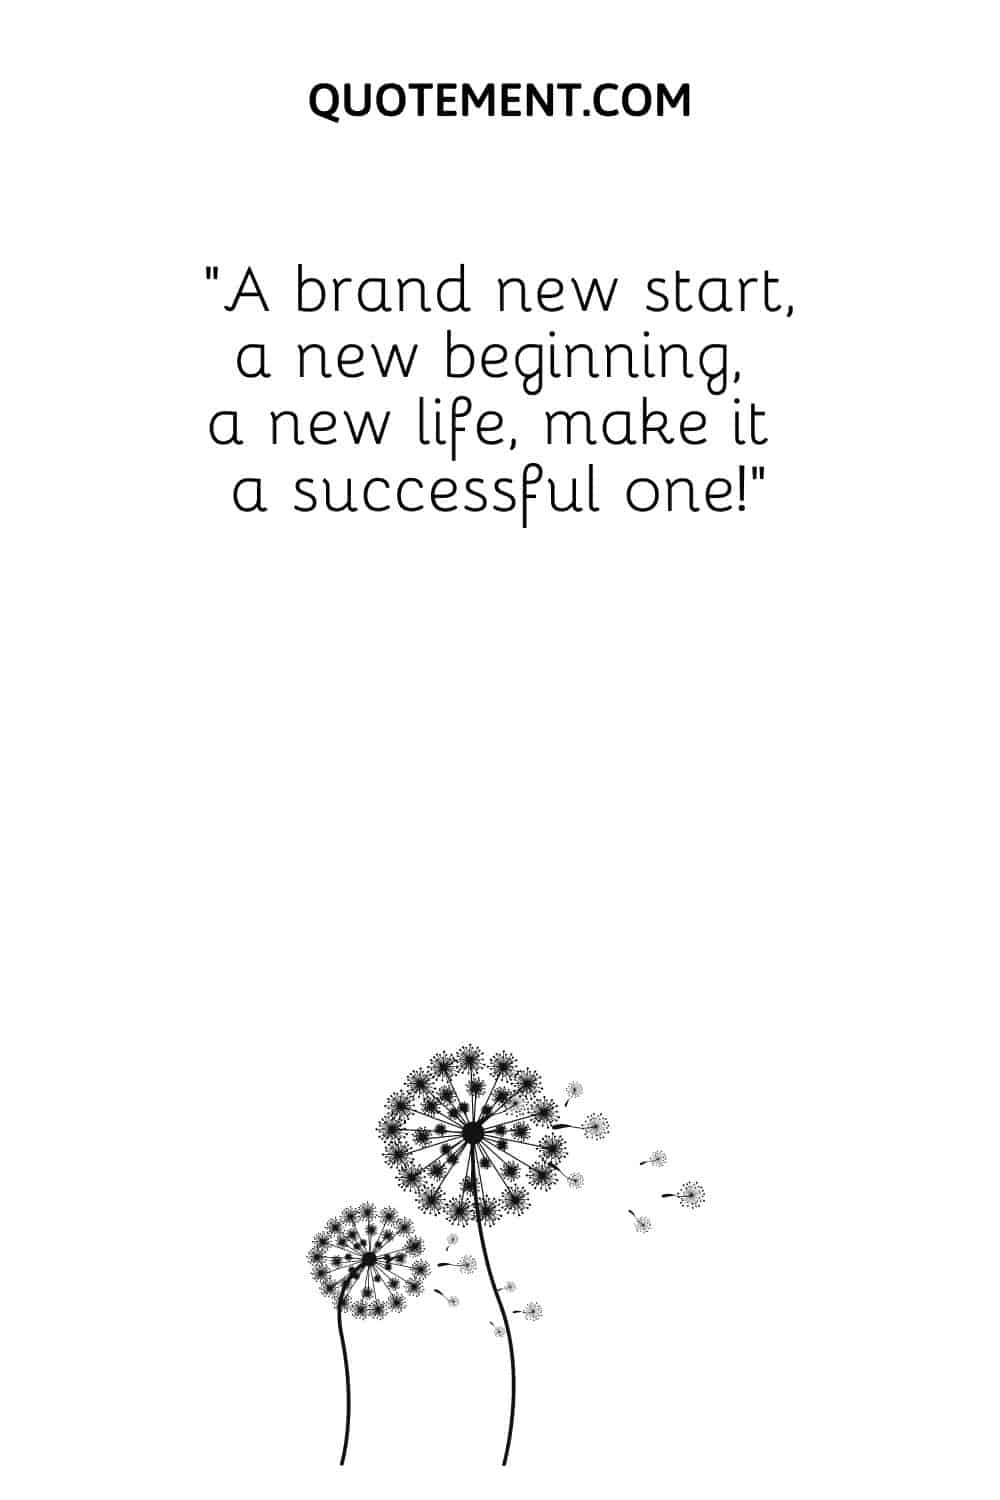 A brand new start, a new beginning, a new life, make it a successful one